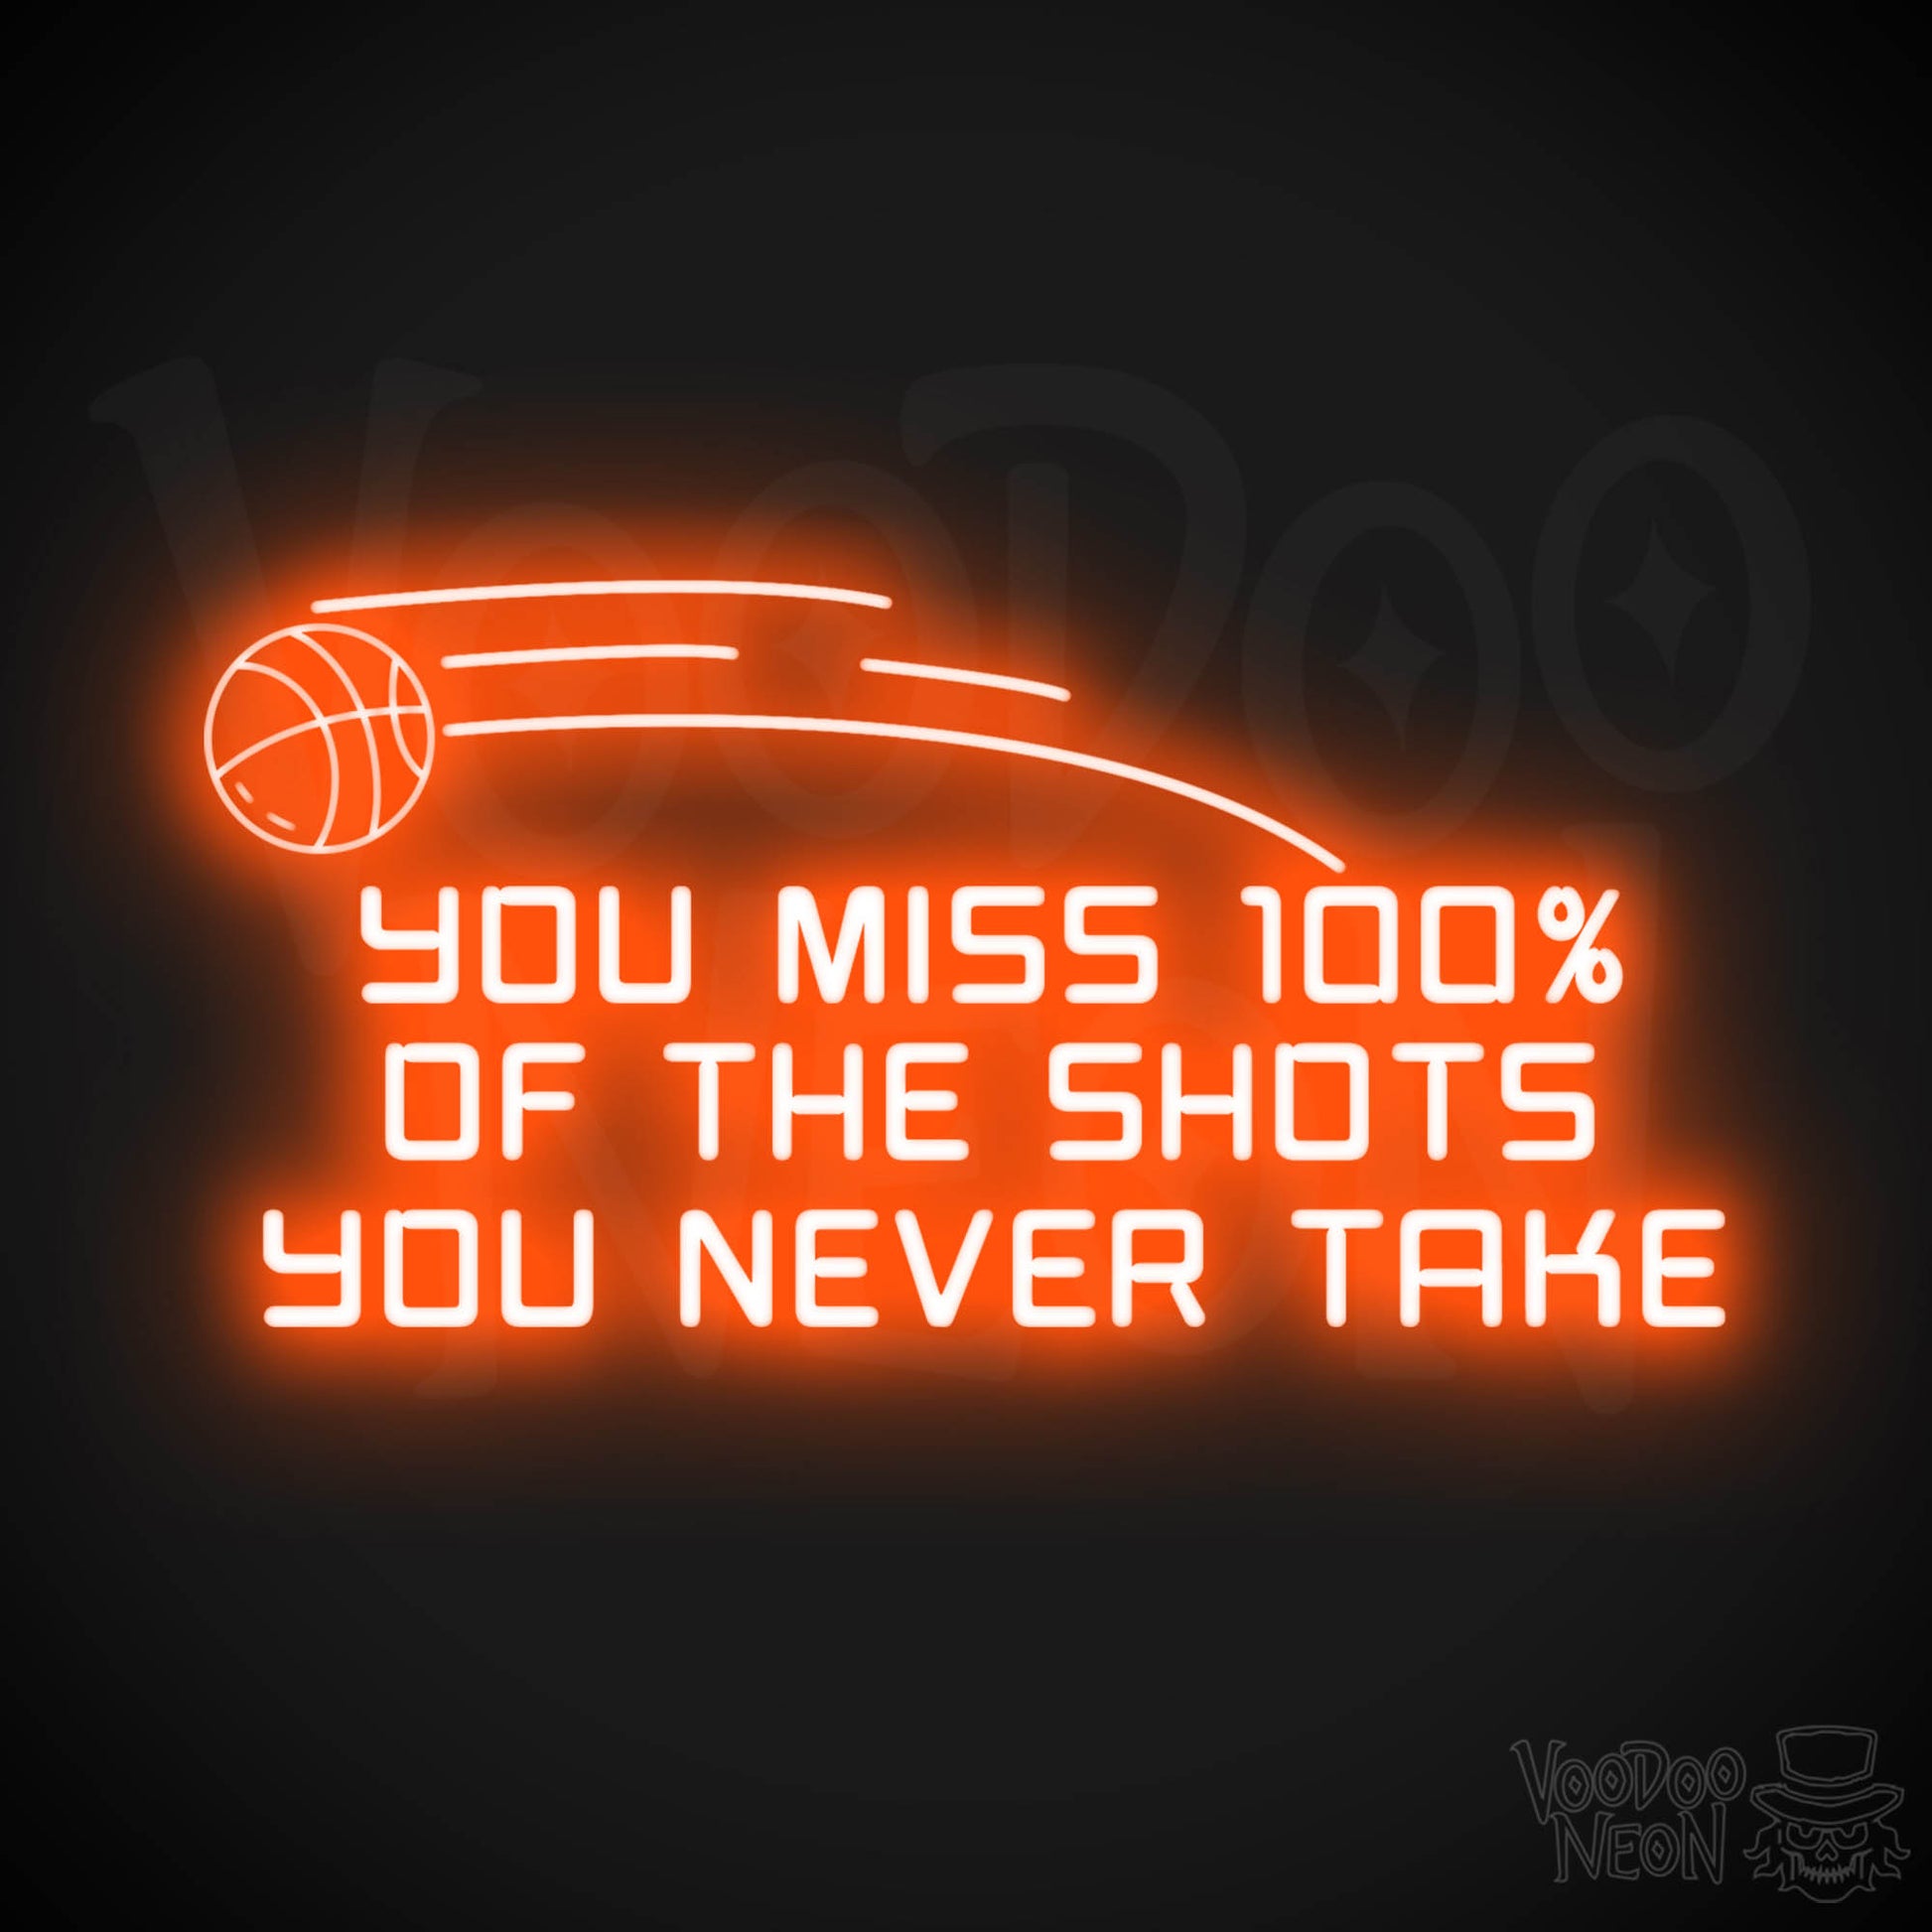 You Miss 100% of the Shots You Never Take Neon Sign - Neon Wall Art - Inspirational Signs - Color Orange